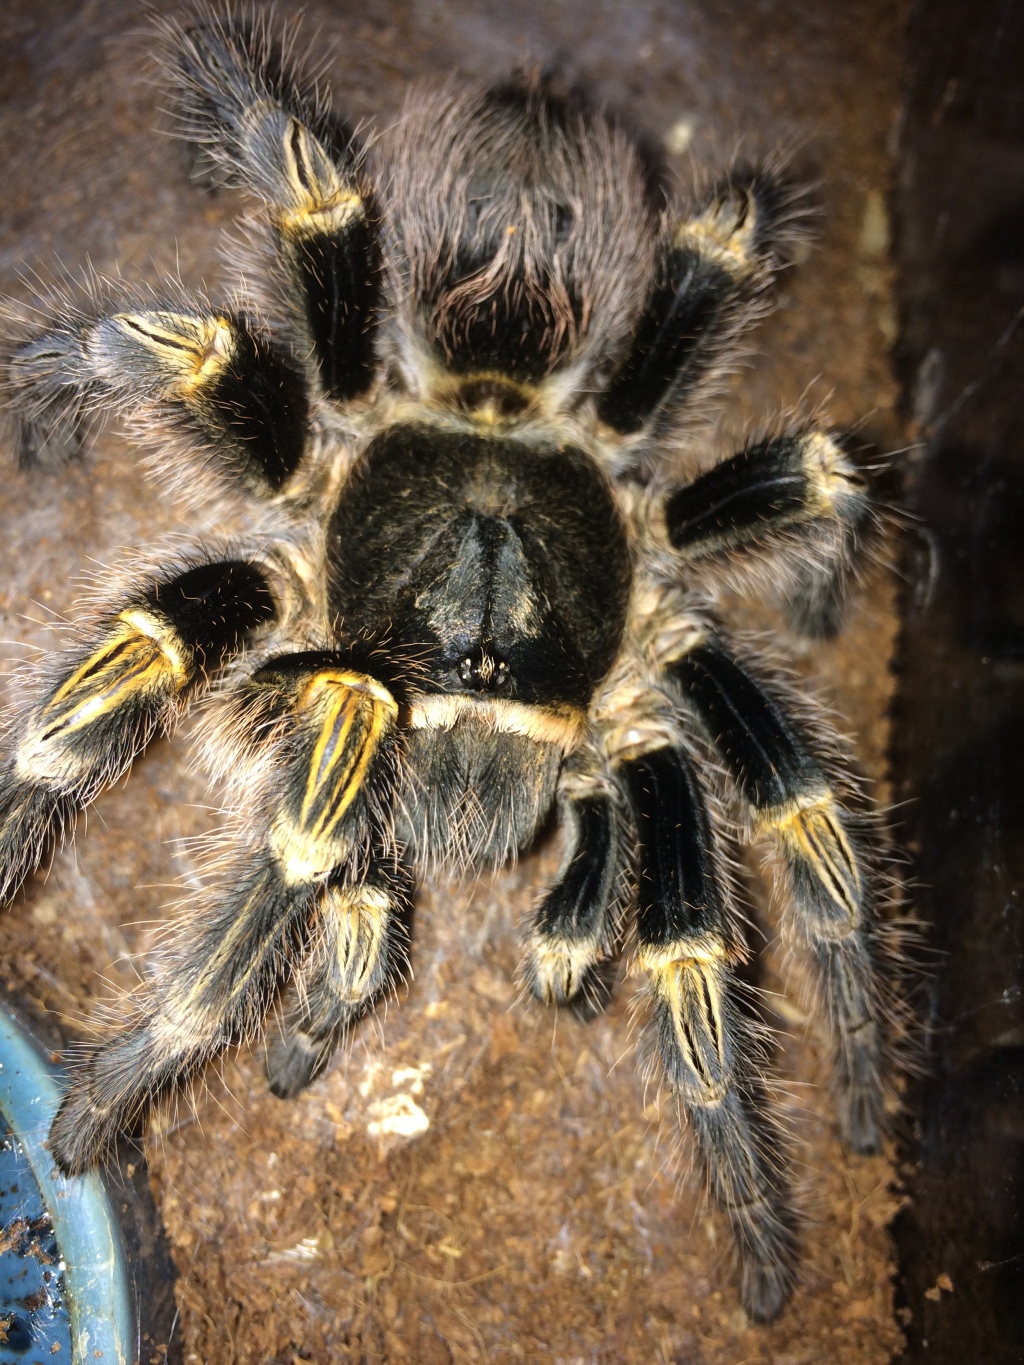 The Highly Underrated Grammostola pulchripes, the Chaco Golden Knee